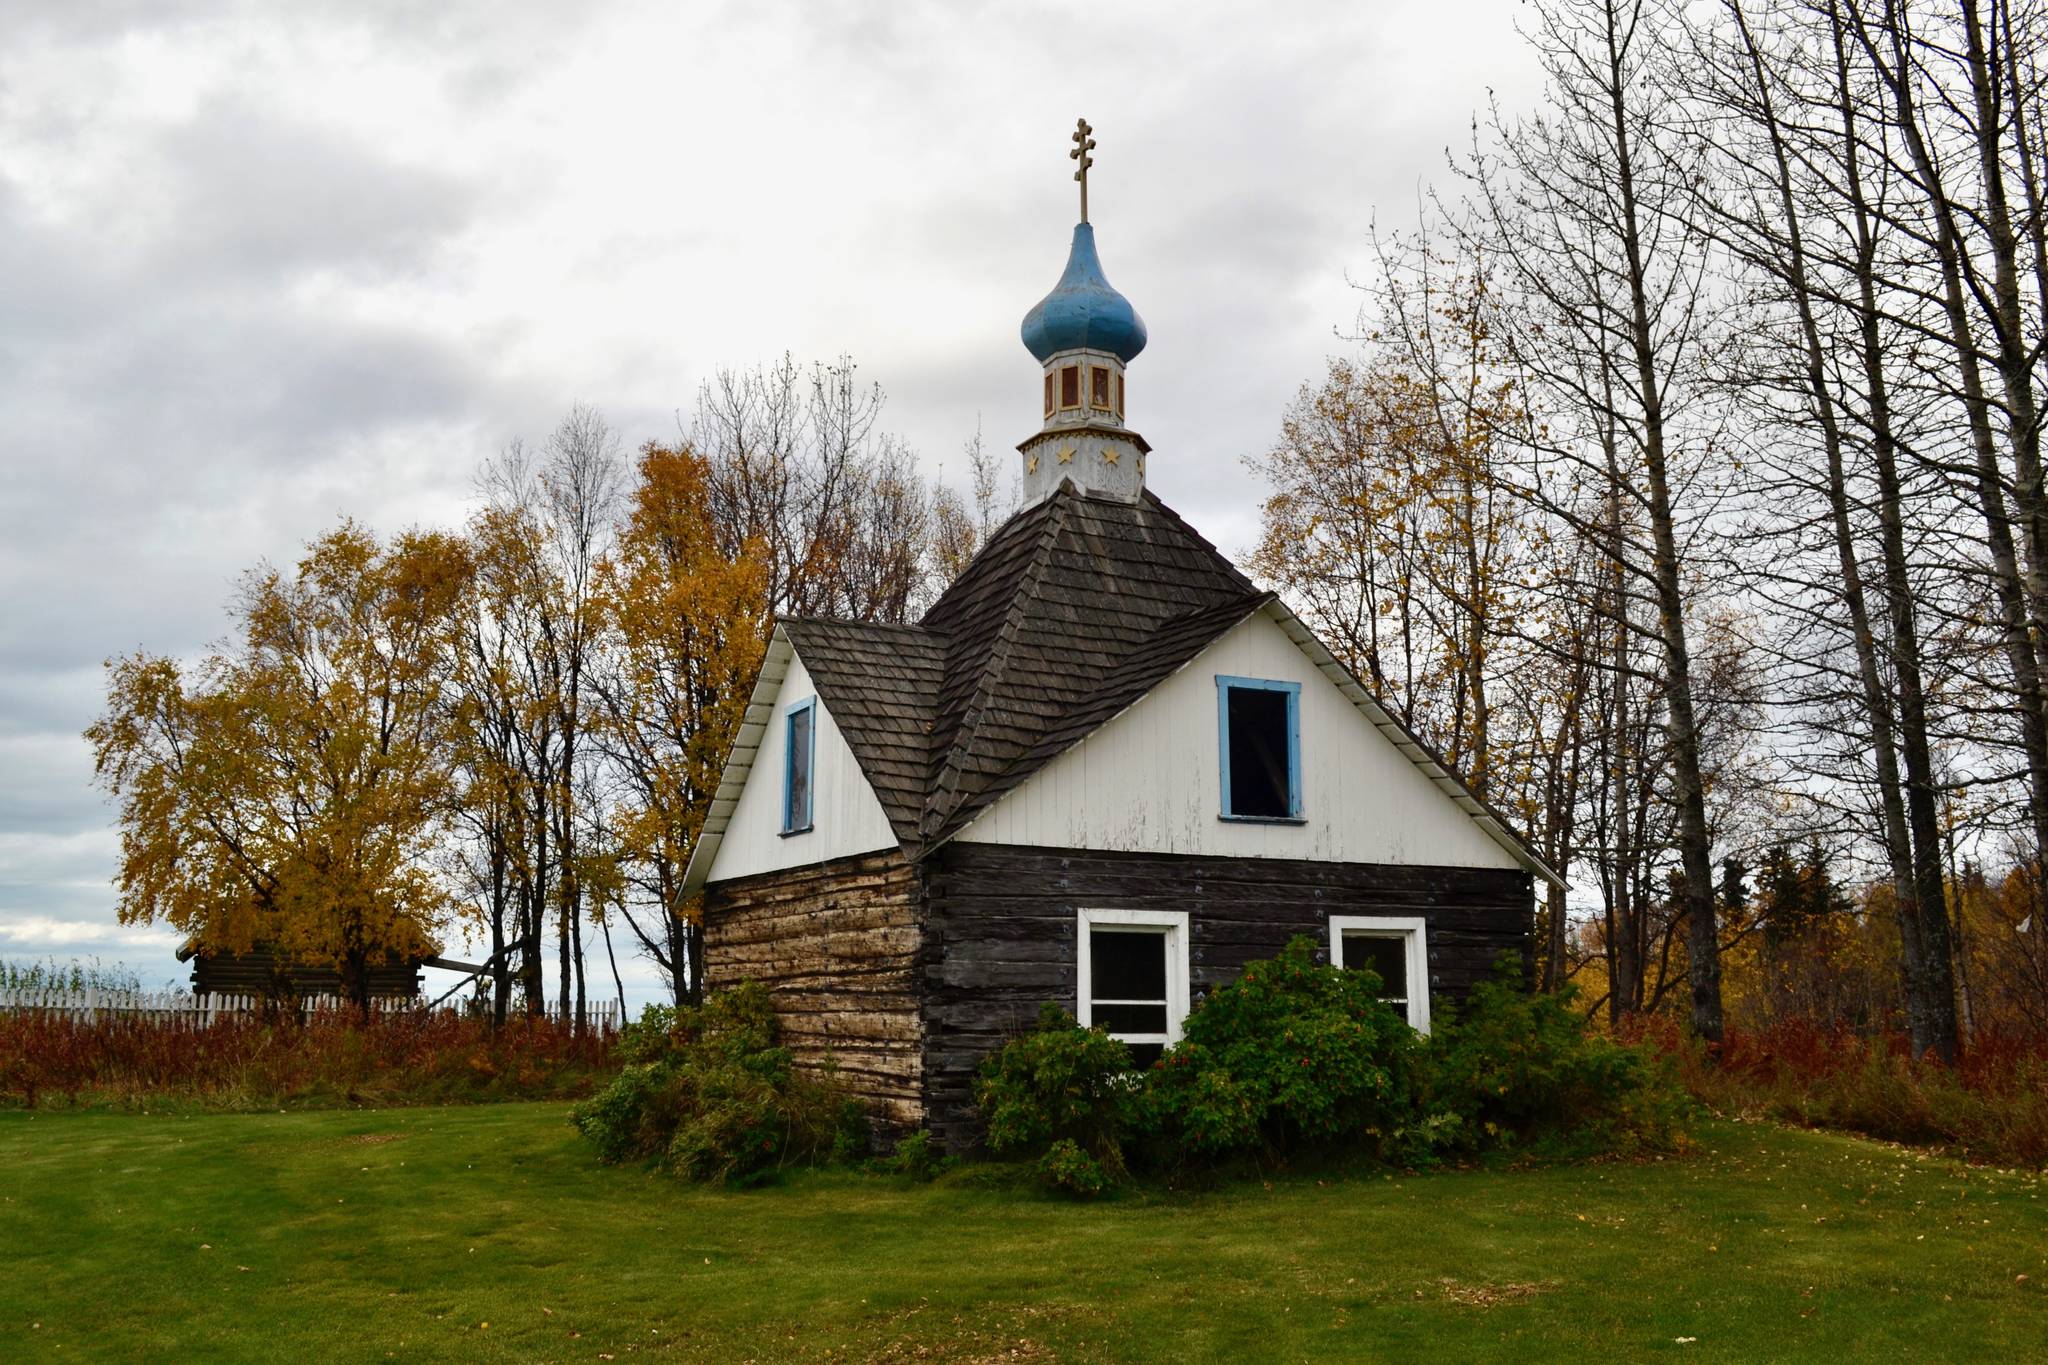 The St. Nicholas Memorial Chapel sits on the bluff in Old Town, Kenai overlooking Cook Inlet on Thursday, in Kenai. (Photo by Victoria Petersen/Peninsula Clarion)